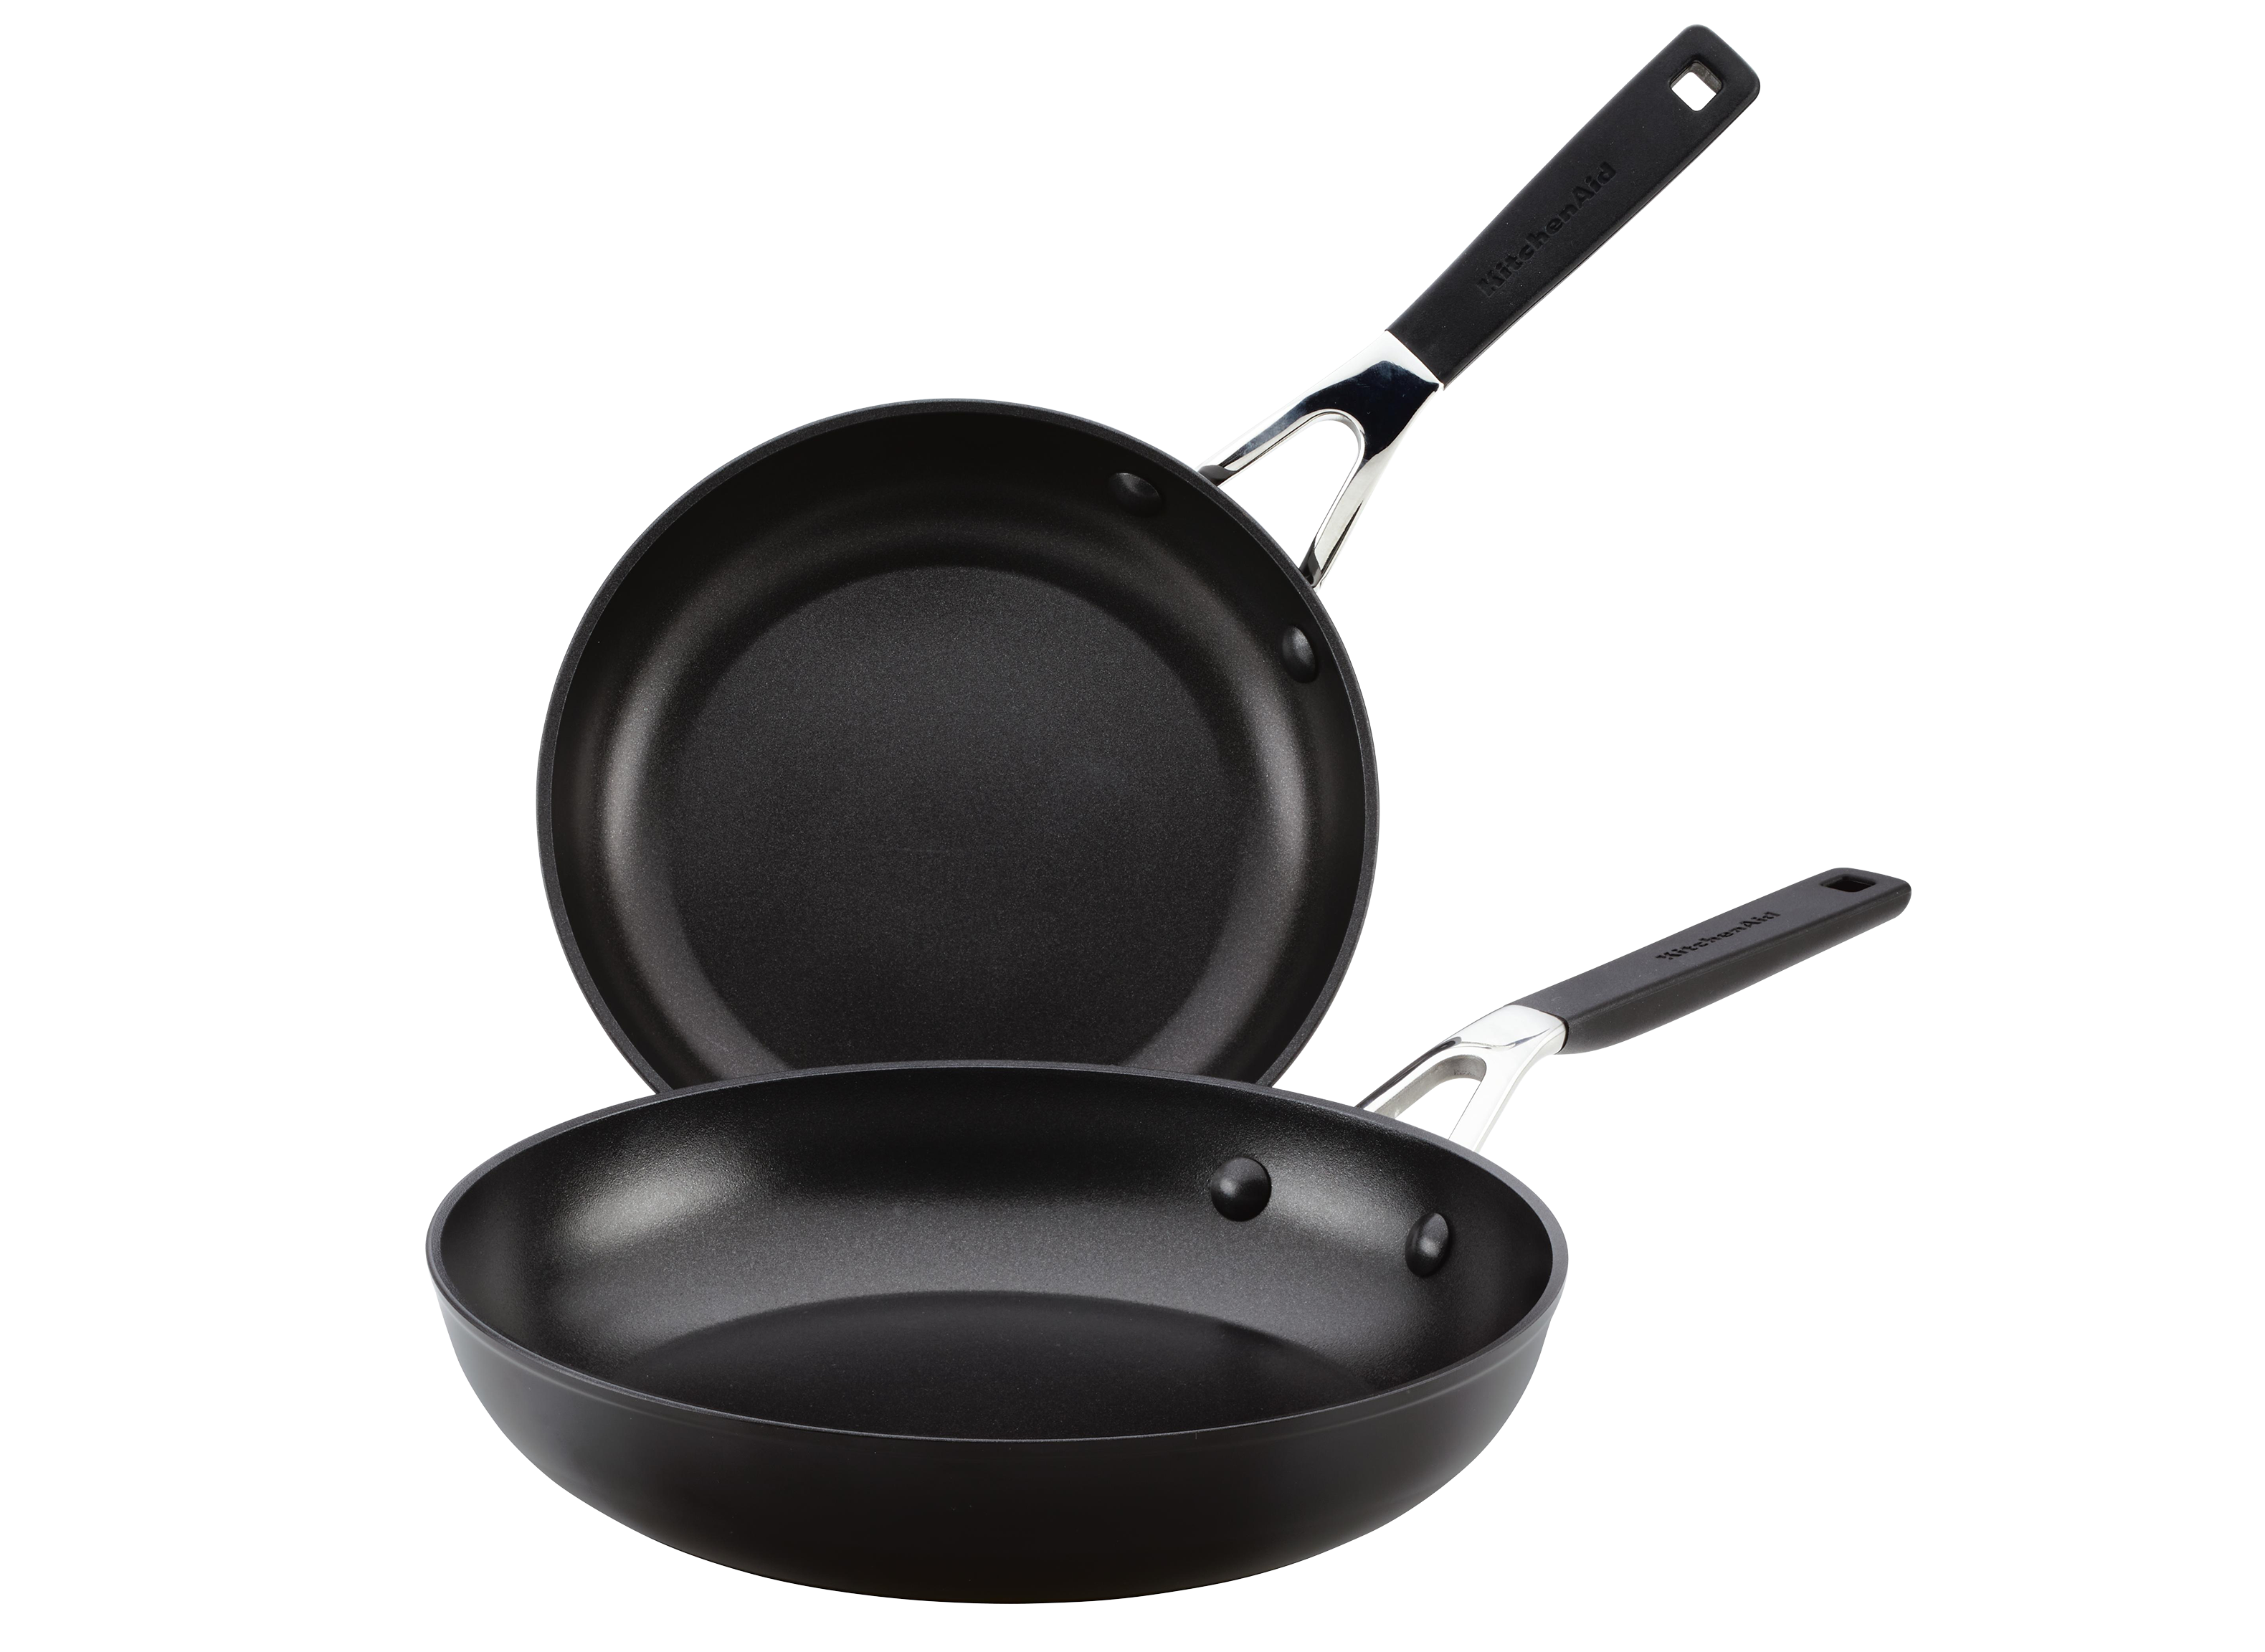 https://crdms.images.consumerreports.org/prod/products/cr/models/407518-frying-pans-nonstick-kitchenaid-hard-anodized-nonstick-10031593.png